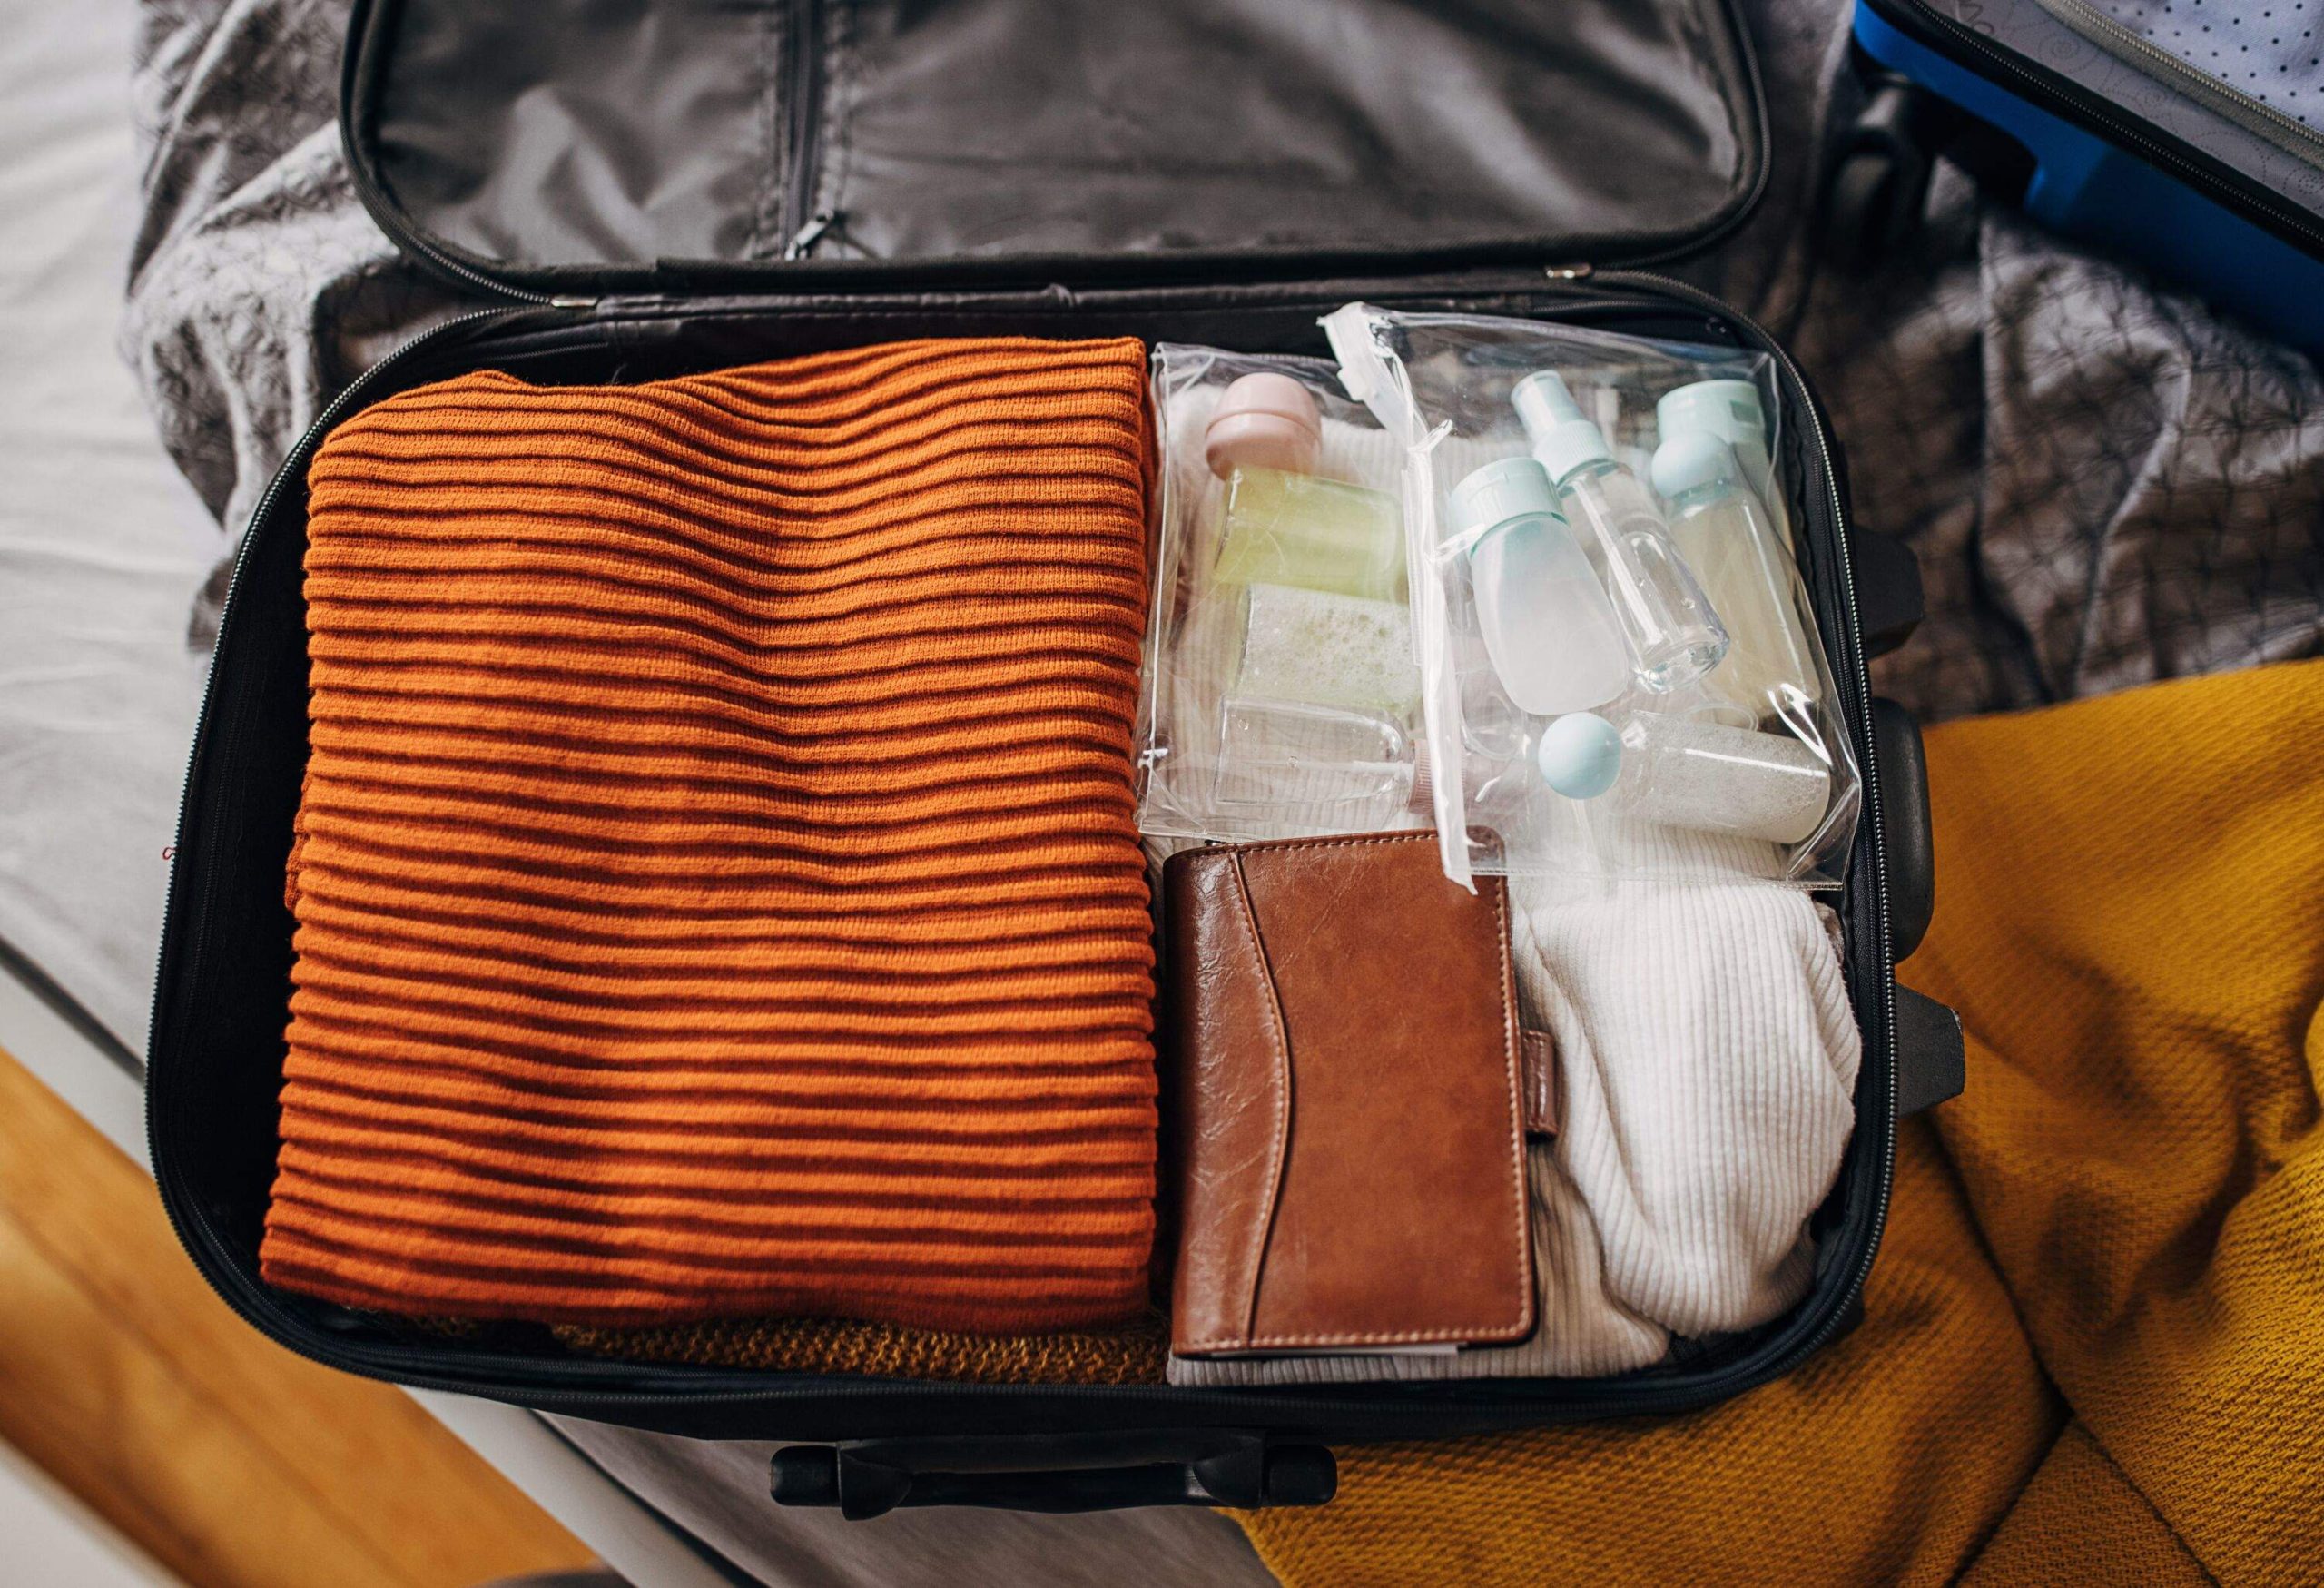 Clothes, cosmetics in the suitcases